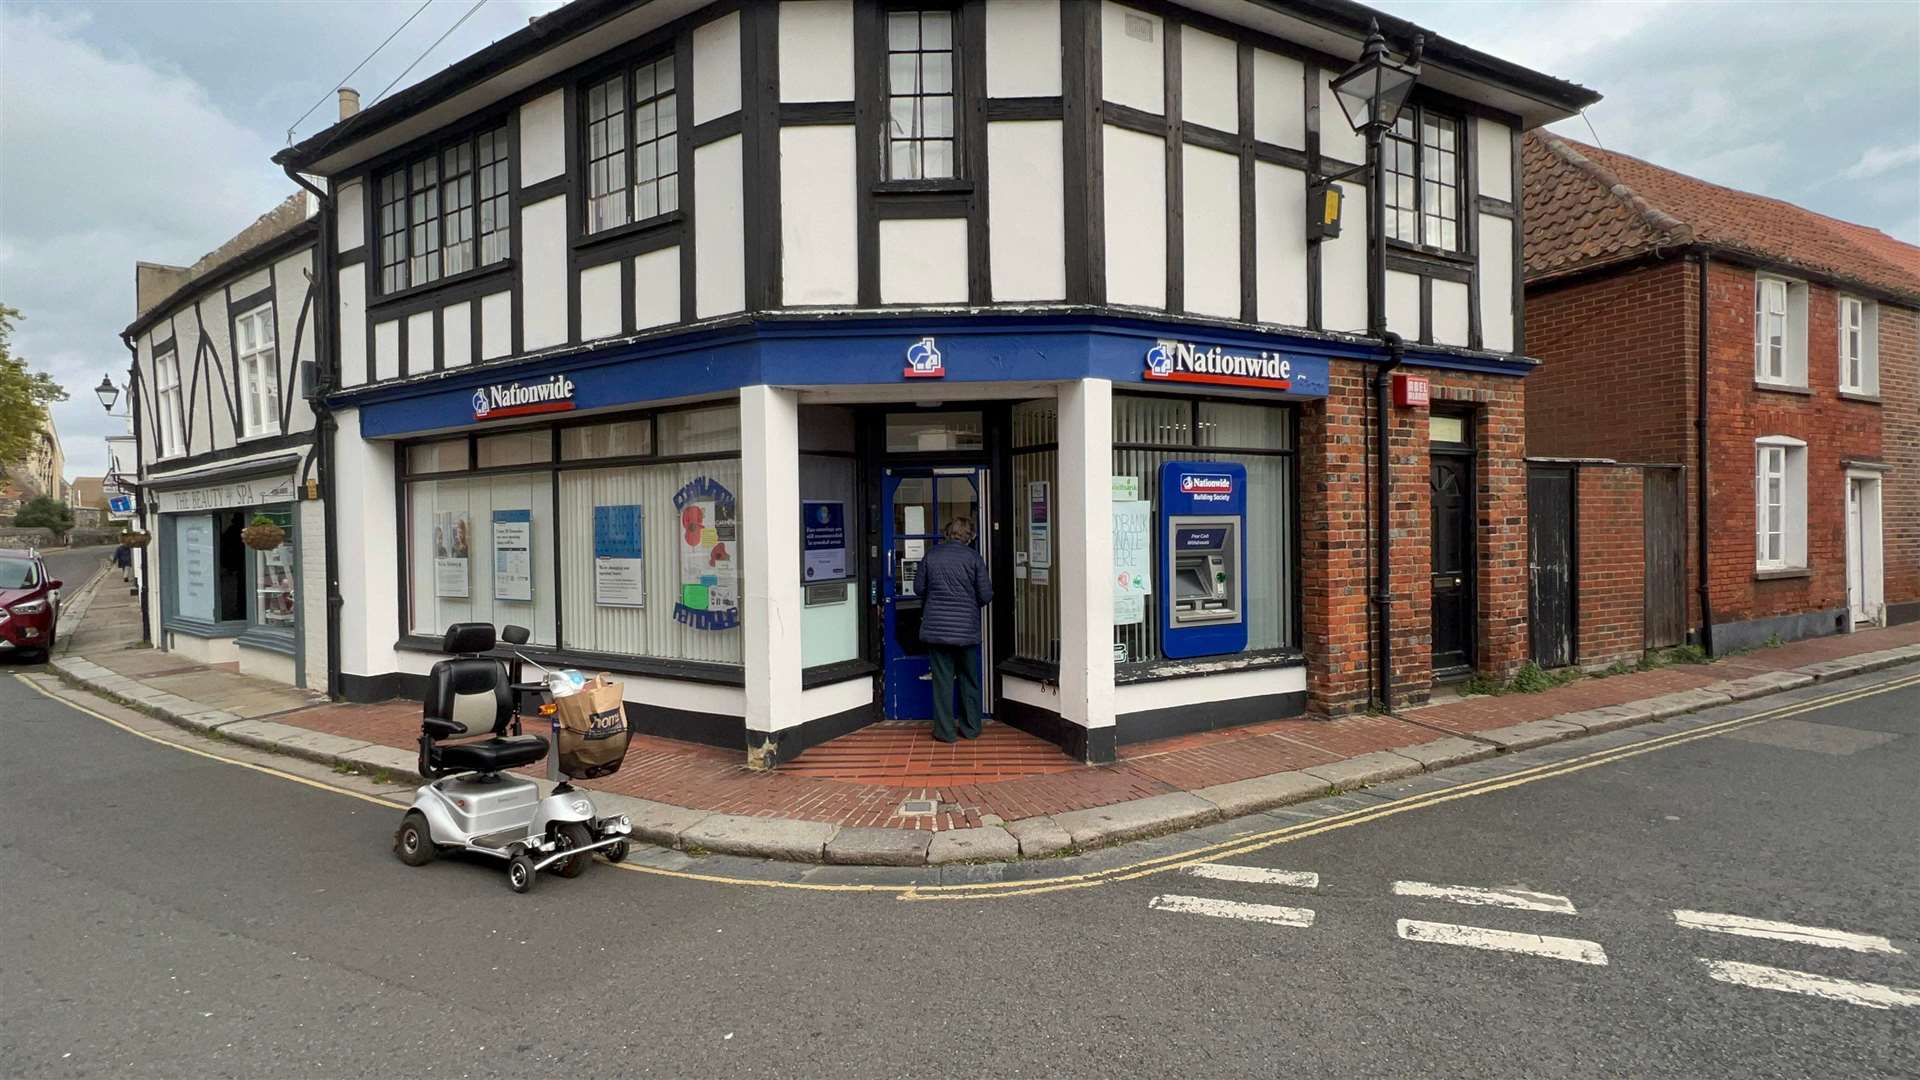 Nationwide in Sandwich is reducing its opening hours